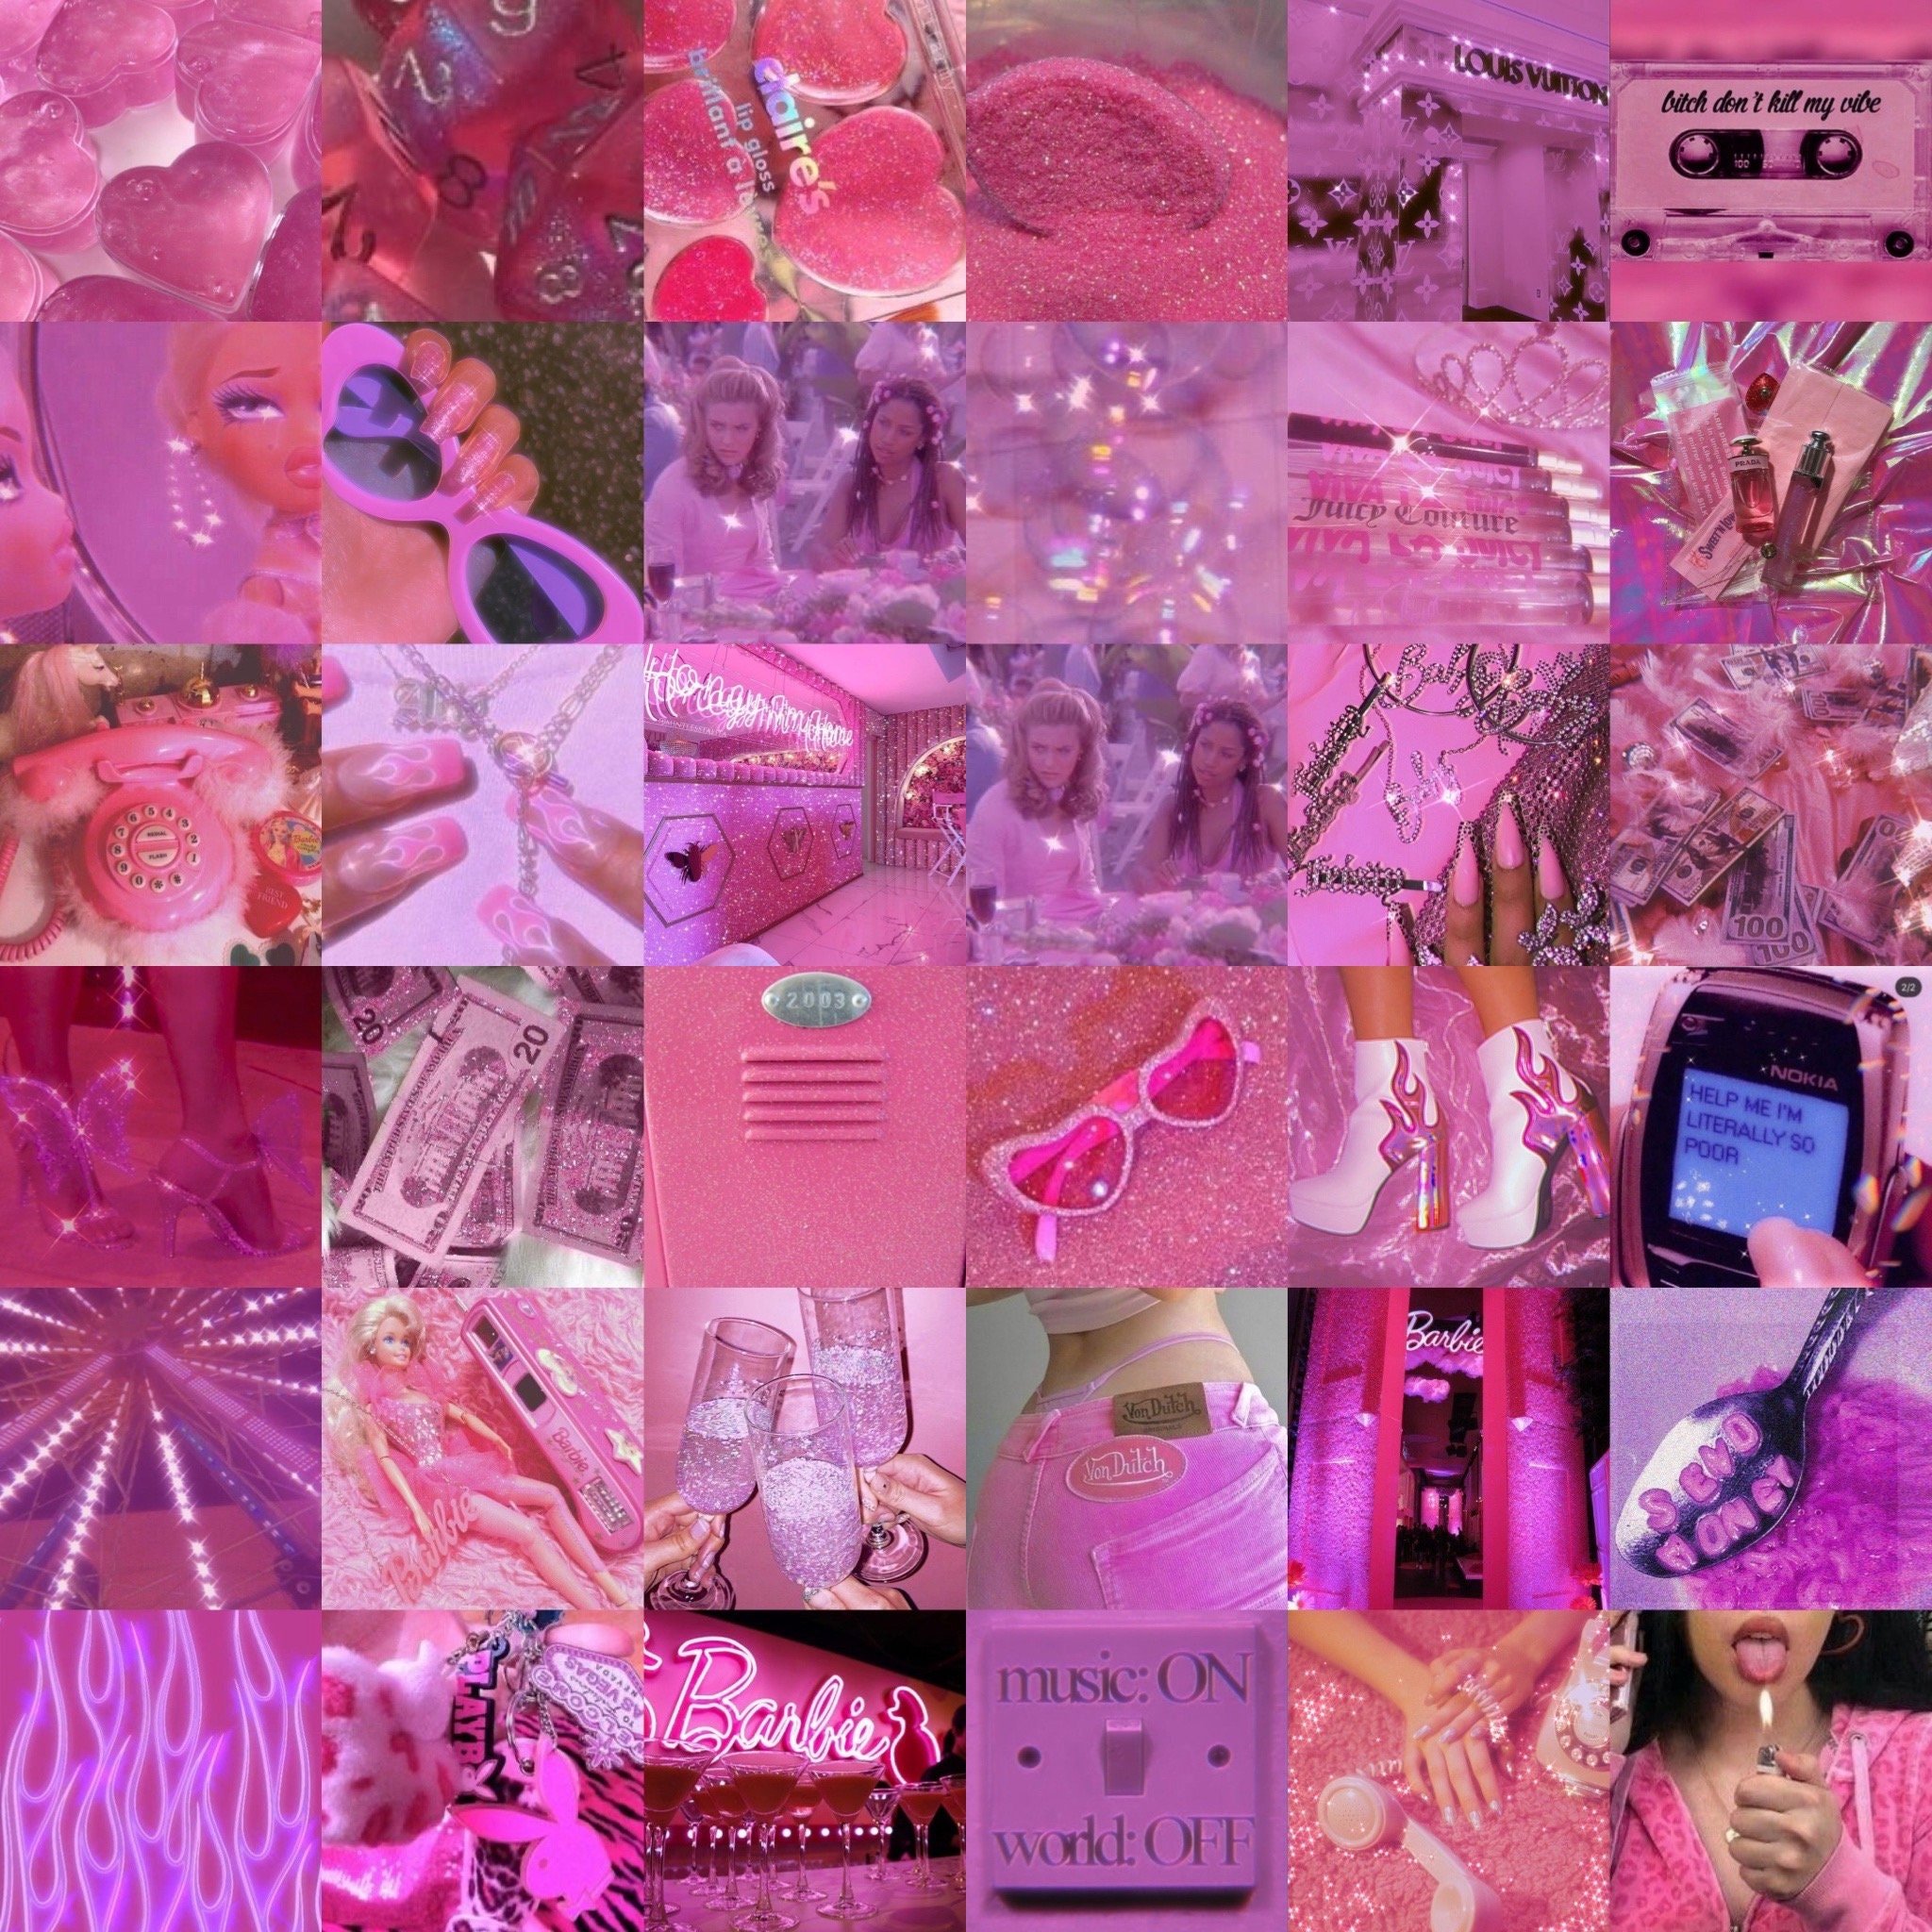 aesthetic wallpaper, y2k and pink designer - image #7999506 on